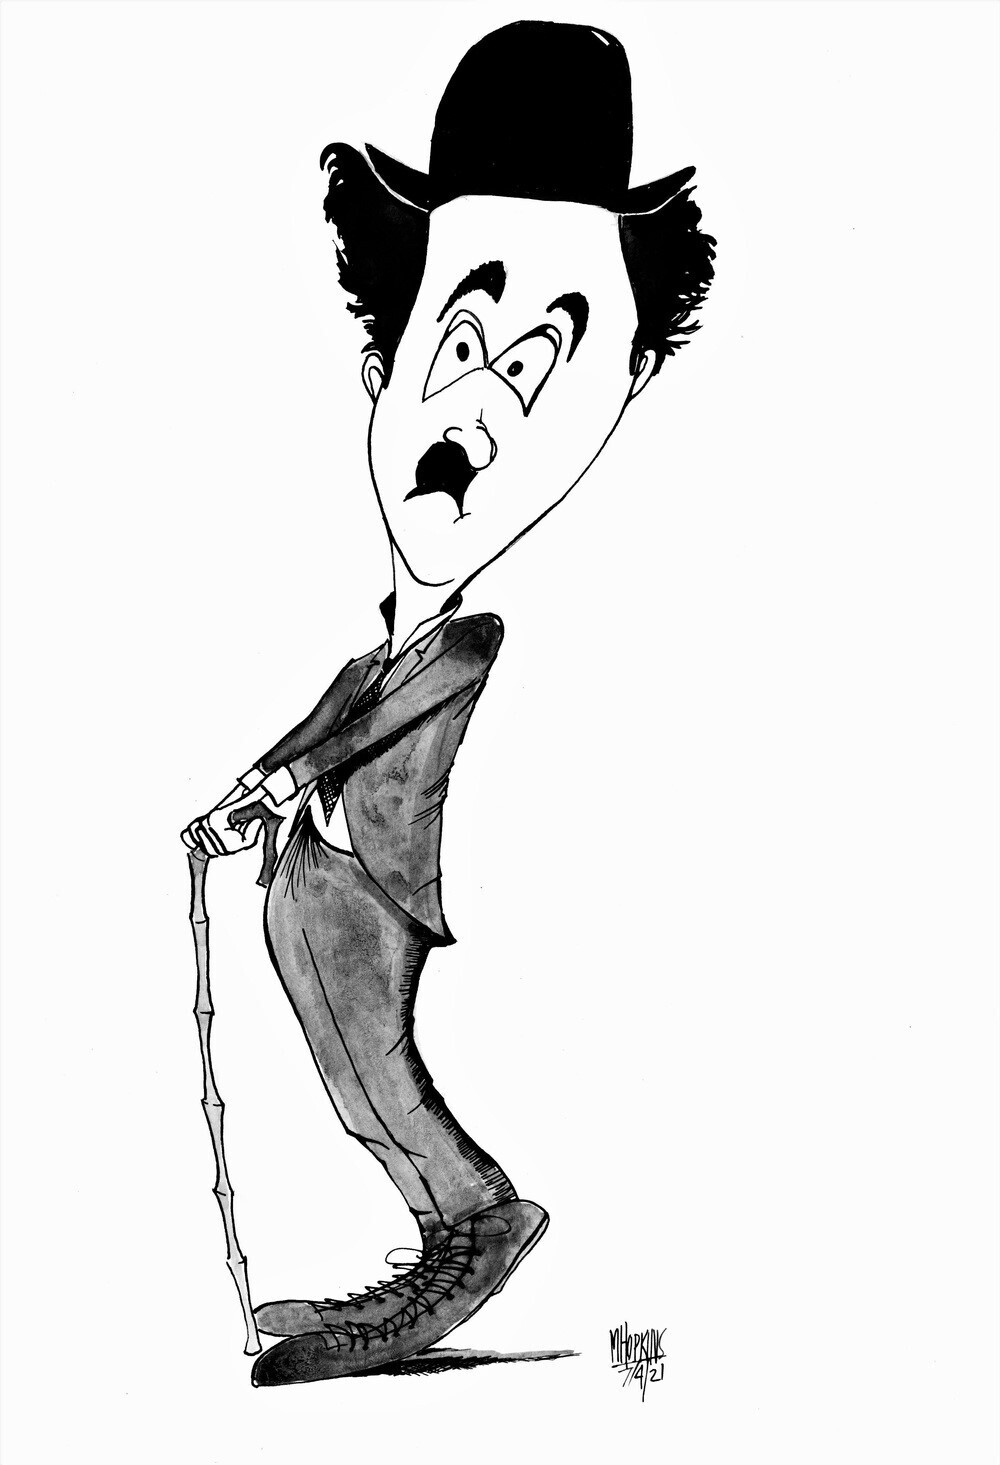 Charlie Chaplin 2 - Original Drawing - 11"x 16" Pen and Ink Caricature by Michael Hopkins.